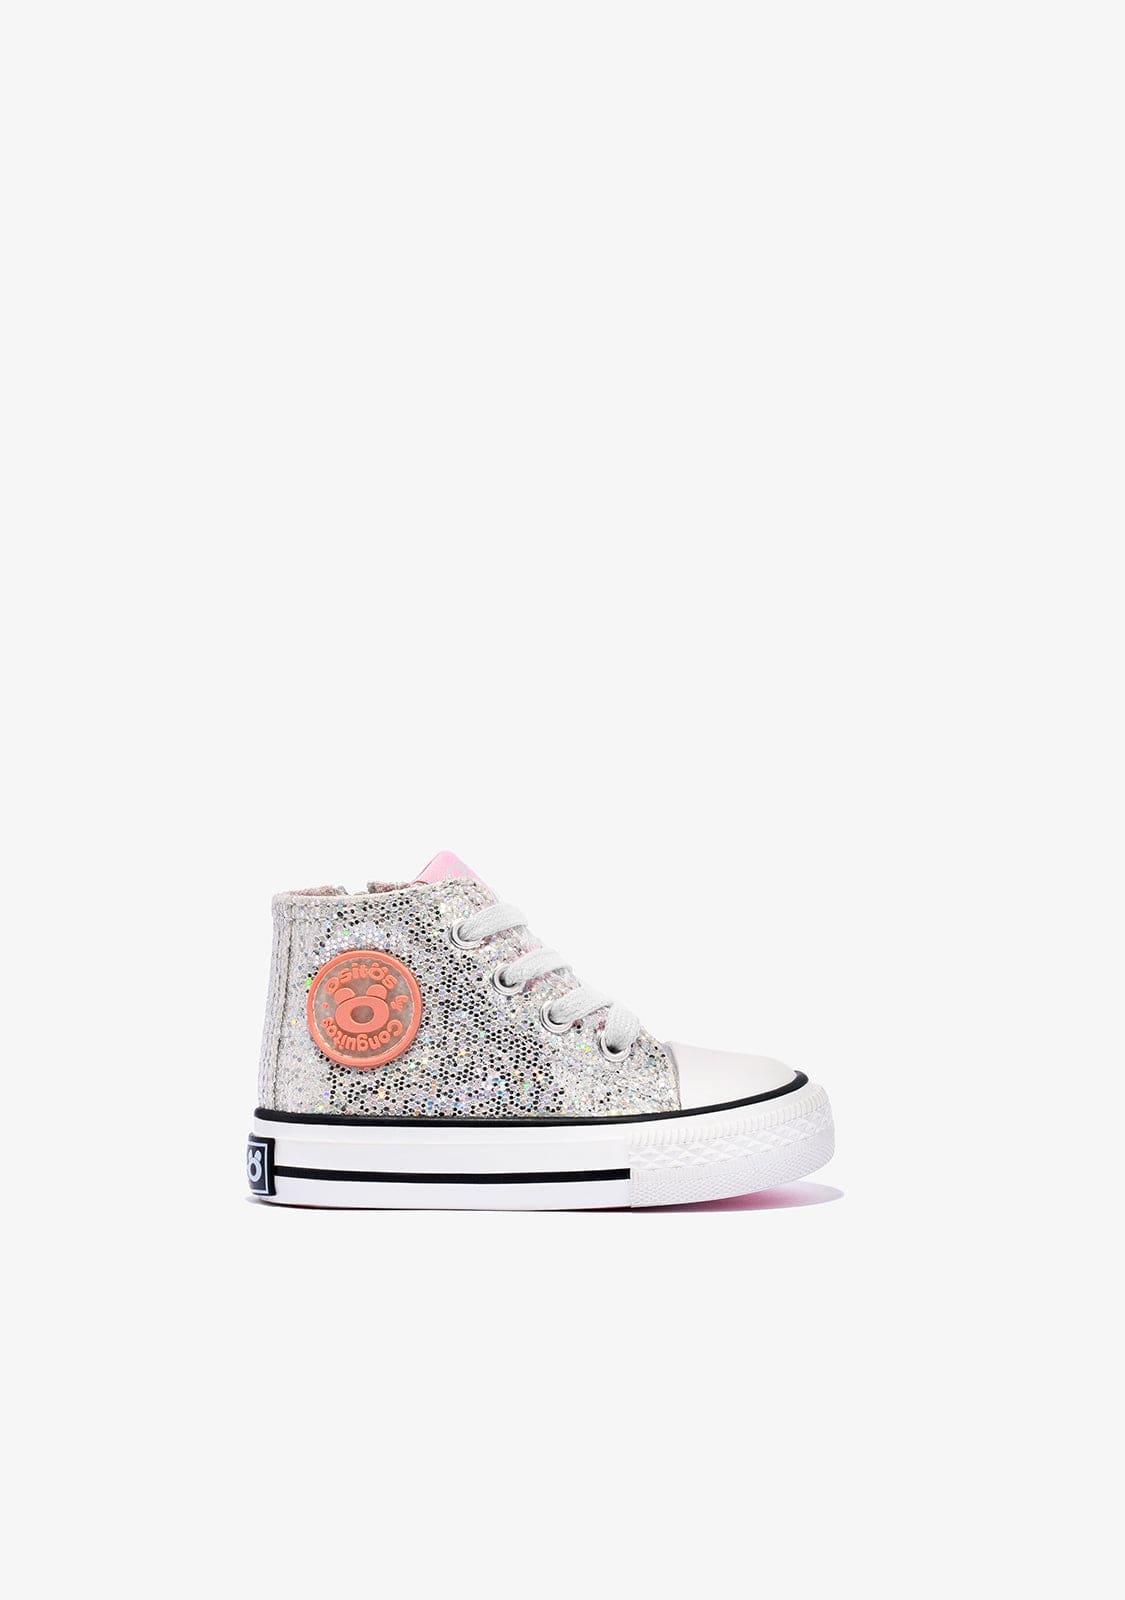 OSITO Shoes Baby's Silver Glitter Hi-Top Sneakers